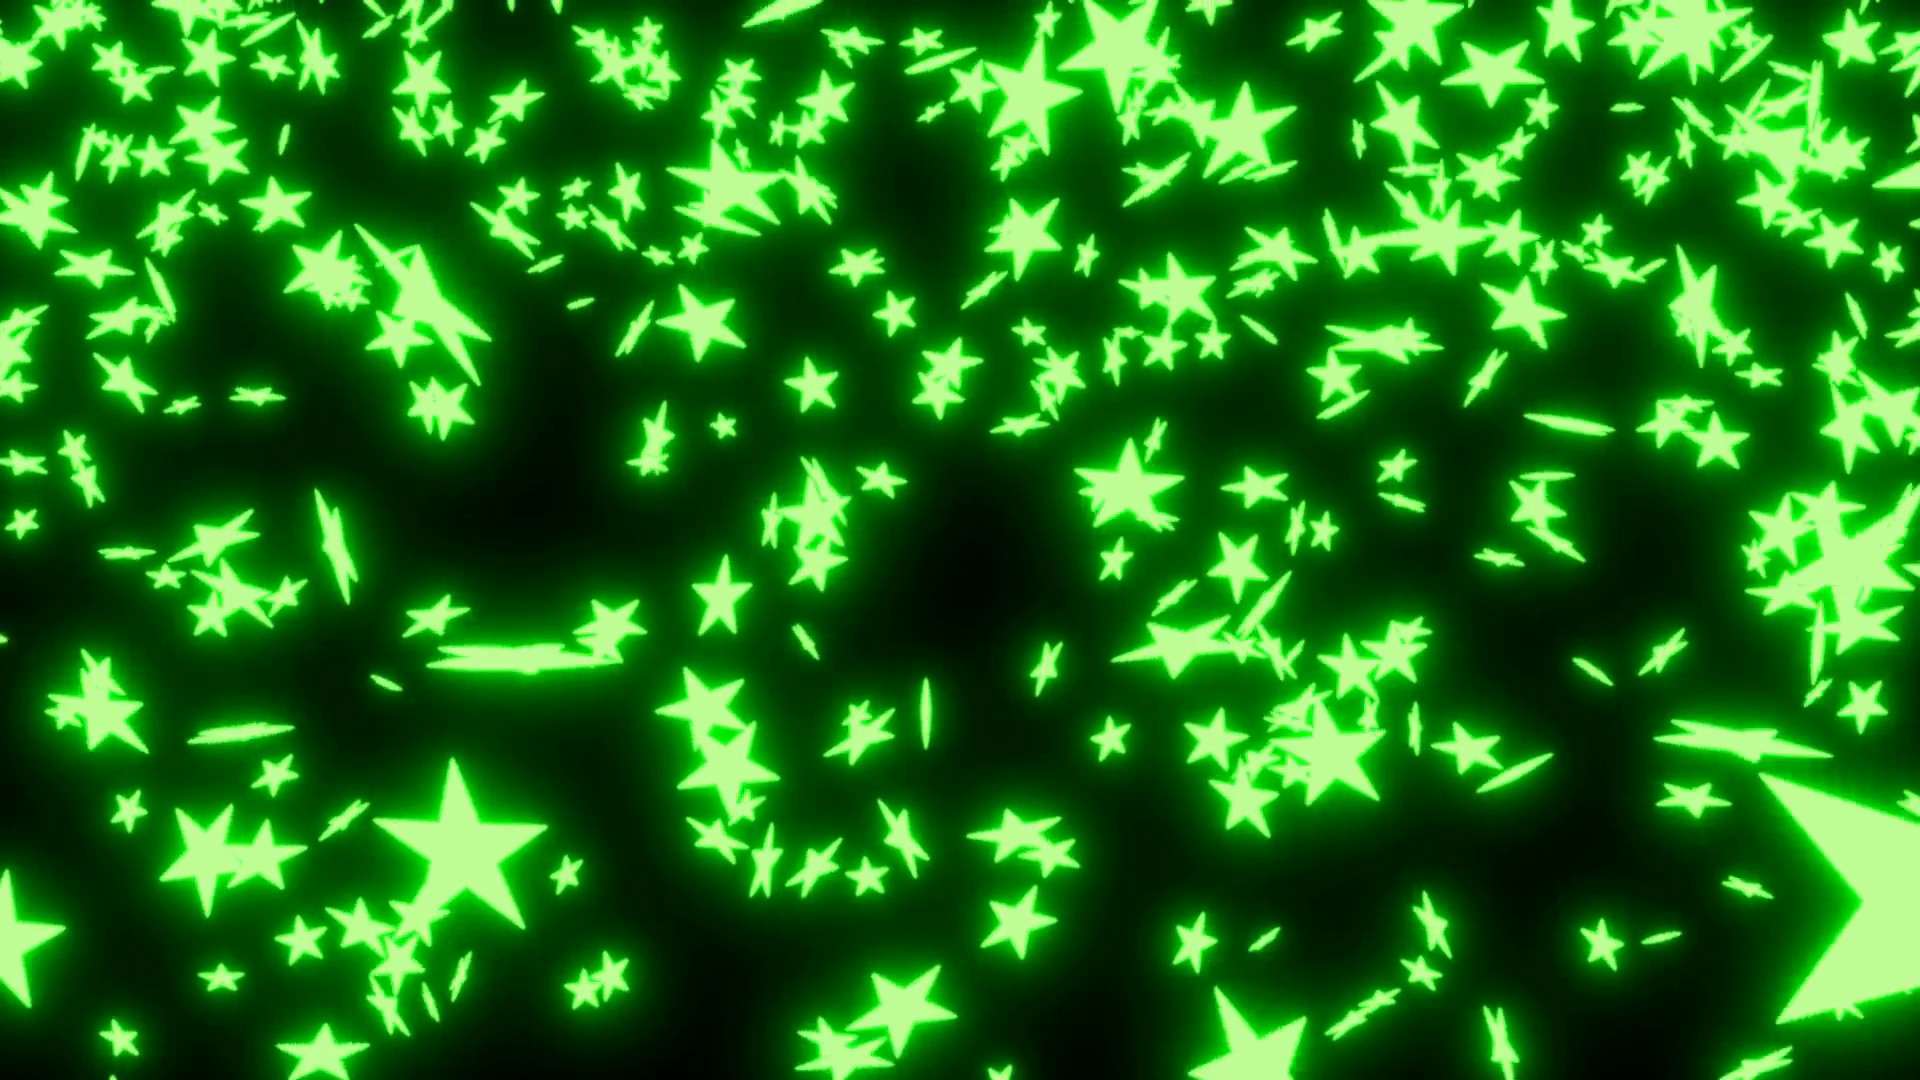 Subscription Library Animated falling neon green stars on black background.